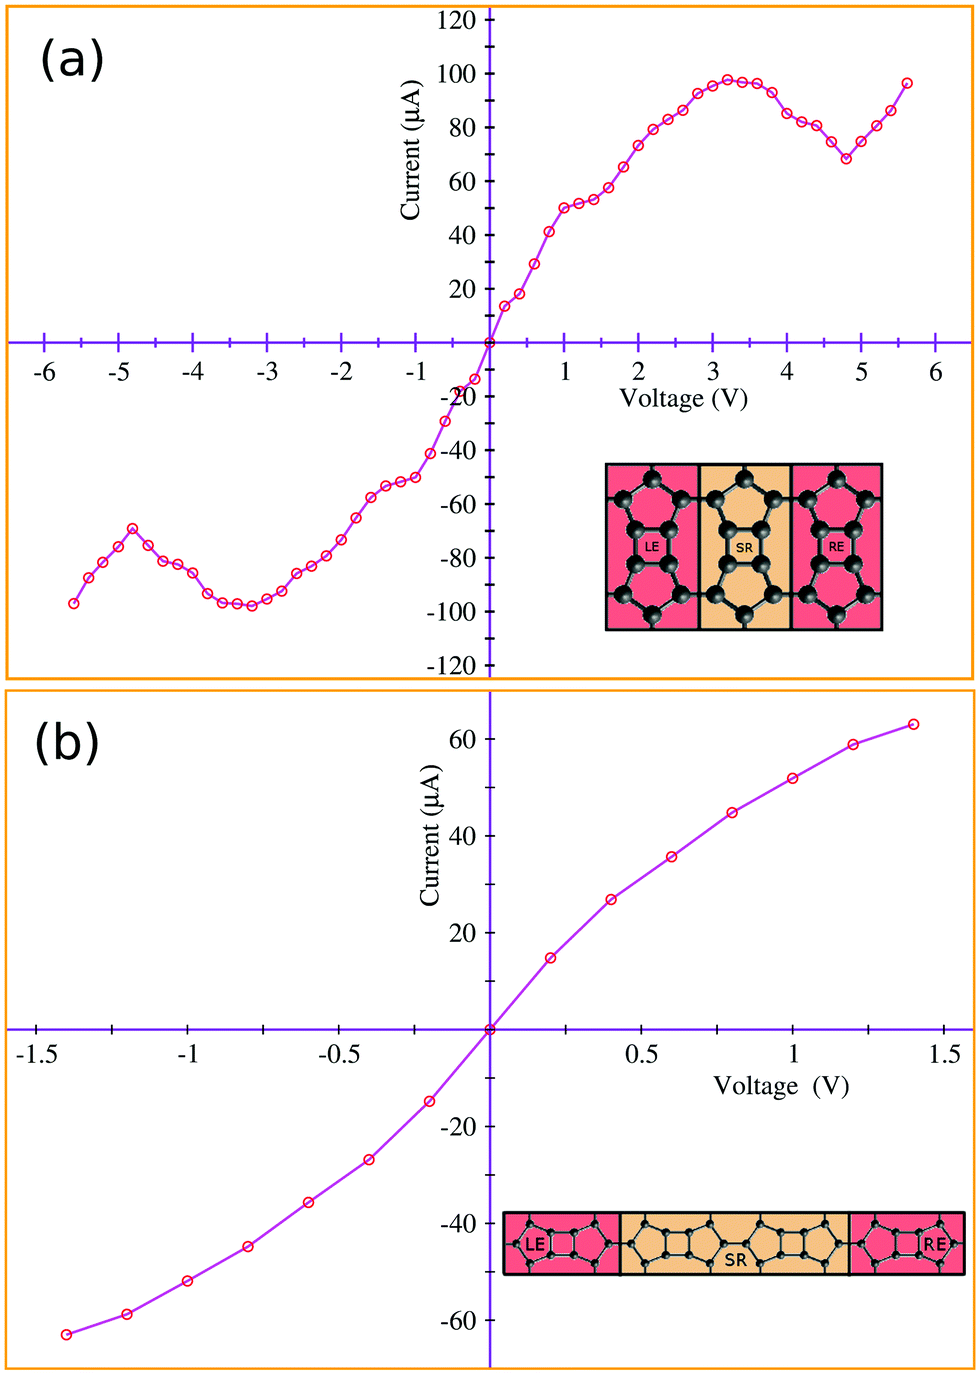 First Principles Calculation Of The Electronic And Optical Properties Of A New Two Dimensional Carbon Allotrope Tetra Penta Octagonal Graphene Physical Chemistry Chemical Physics Rsc Publishing Doi 10 1039 C9cpd